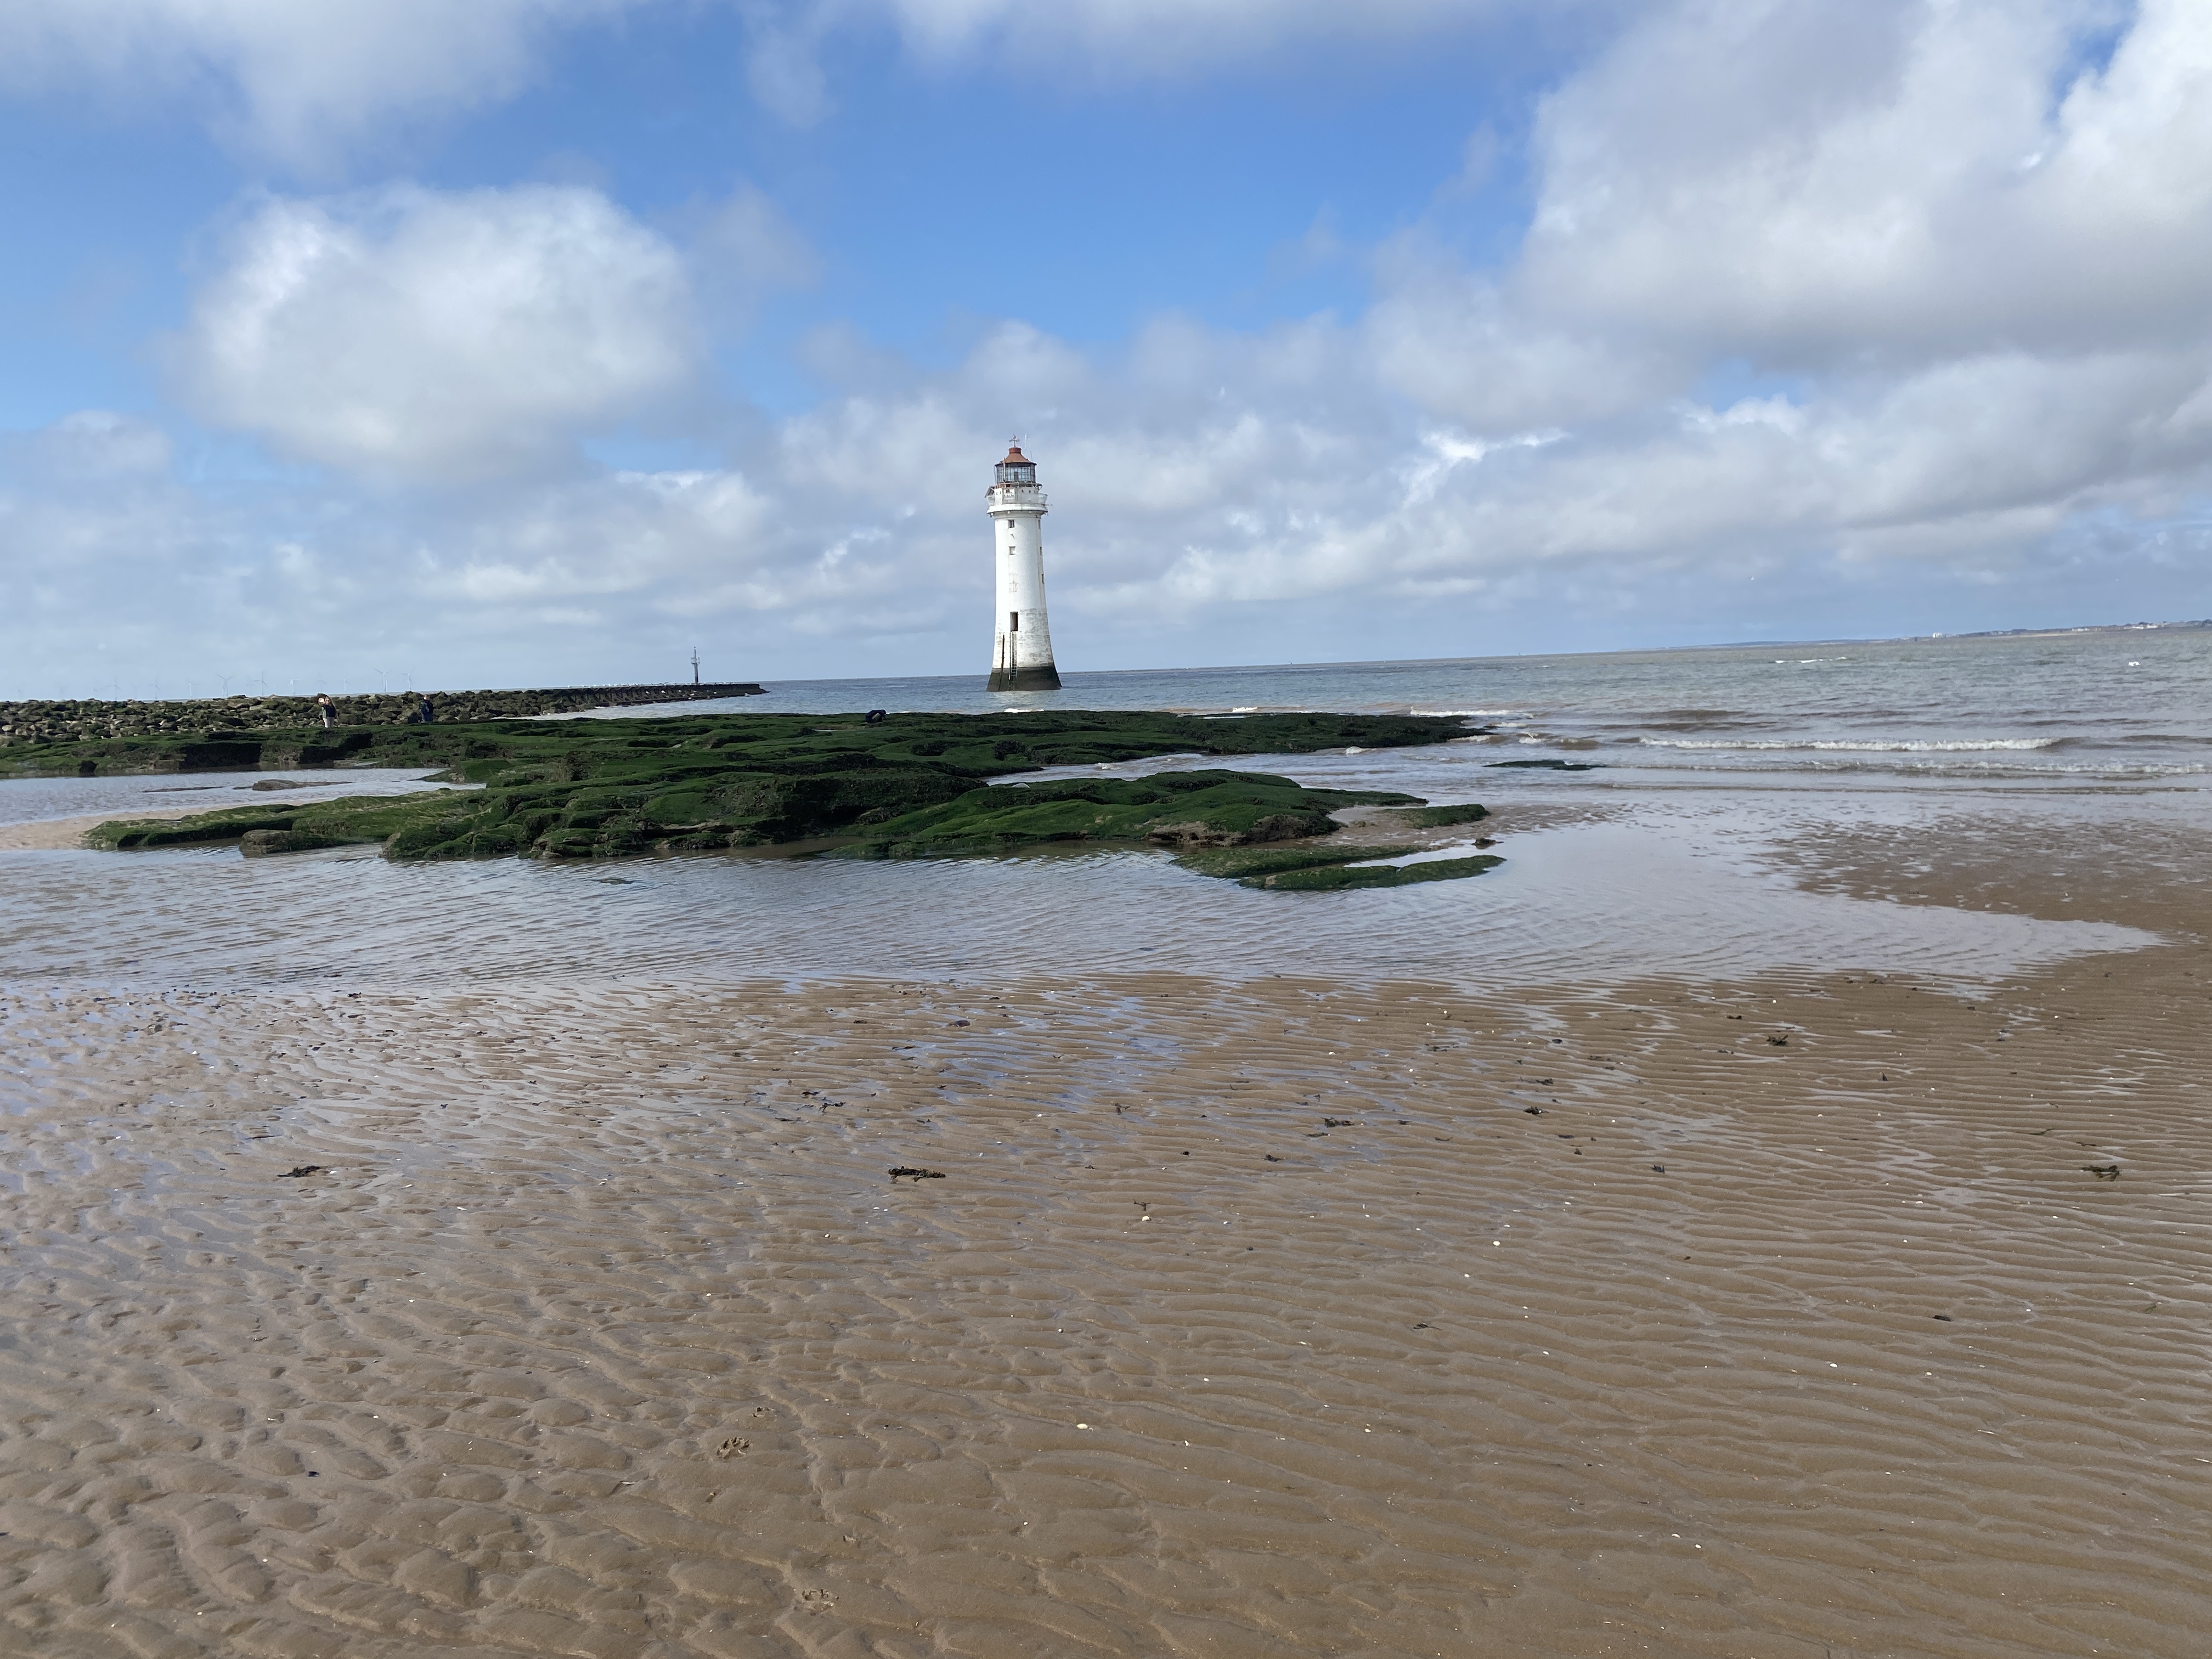 New brighton beach and the lighthouse